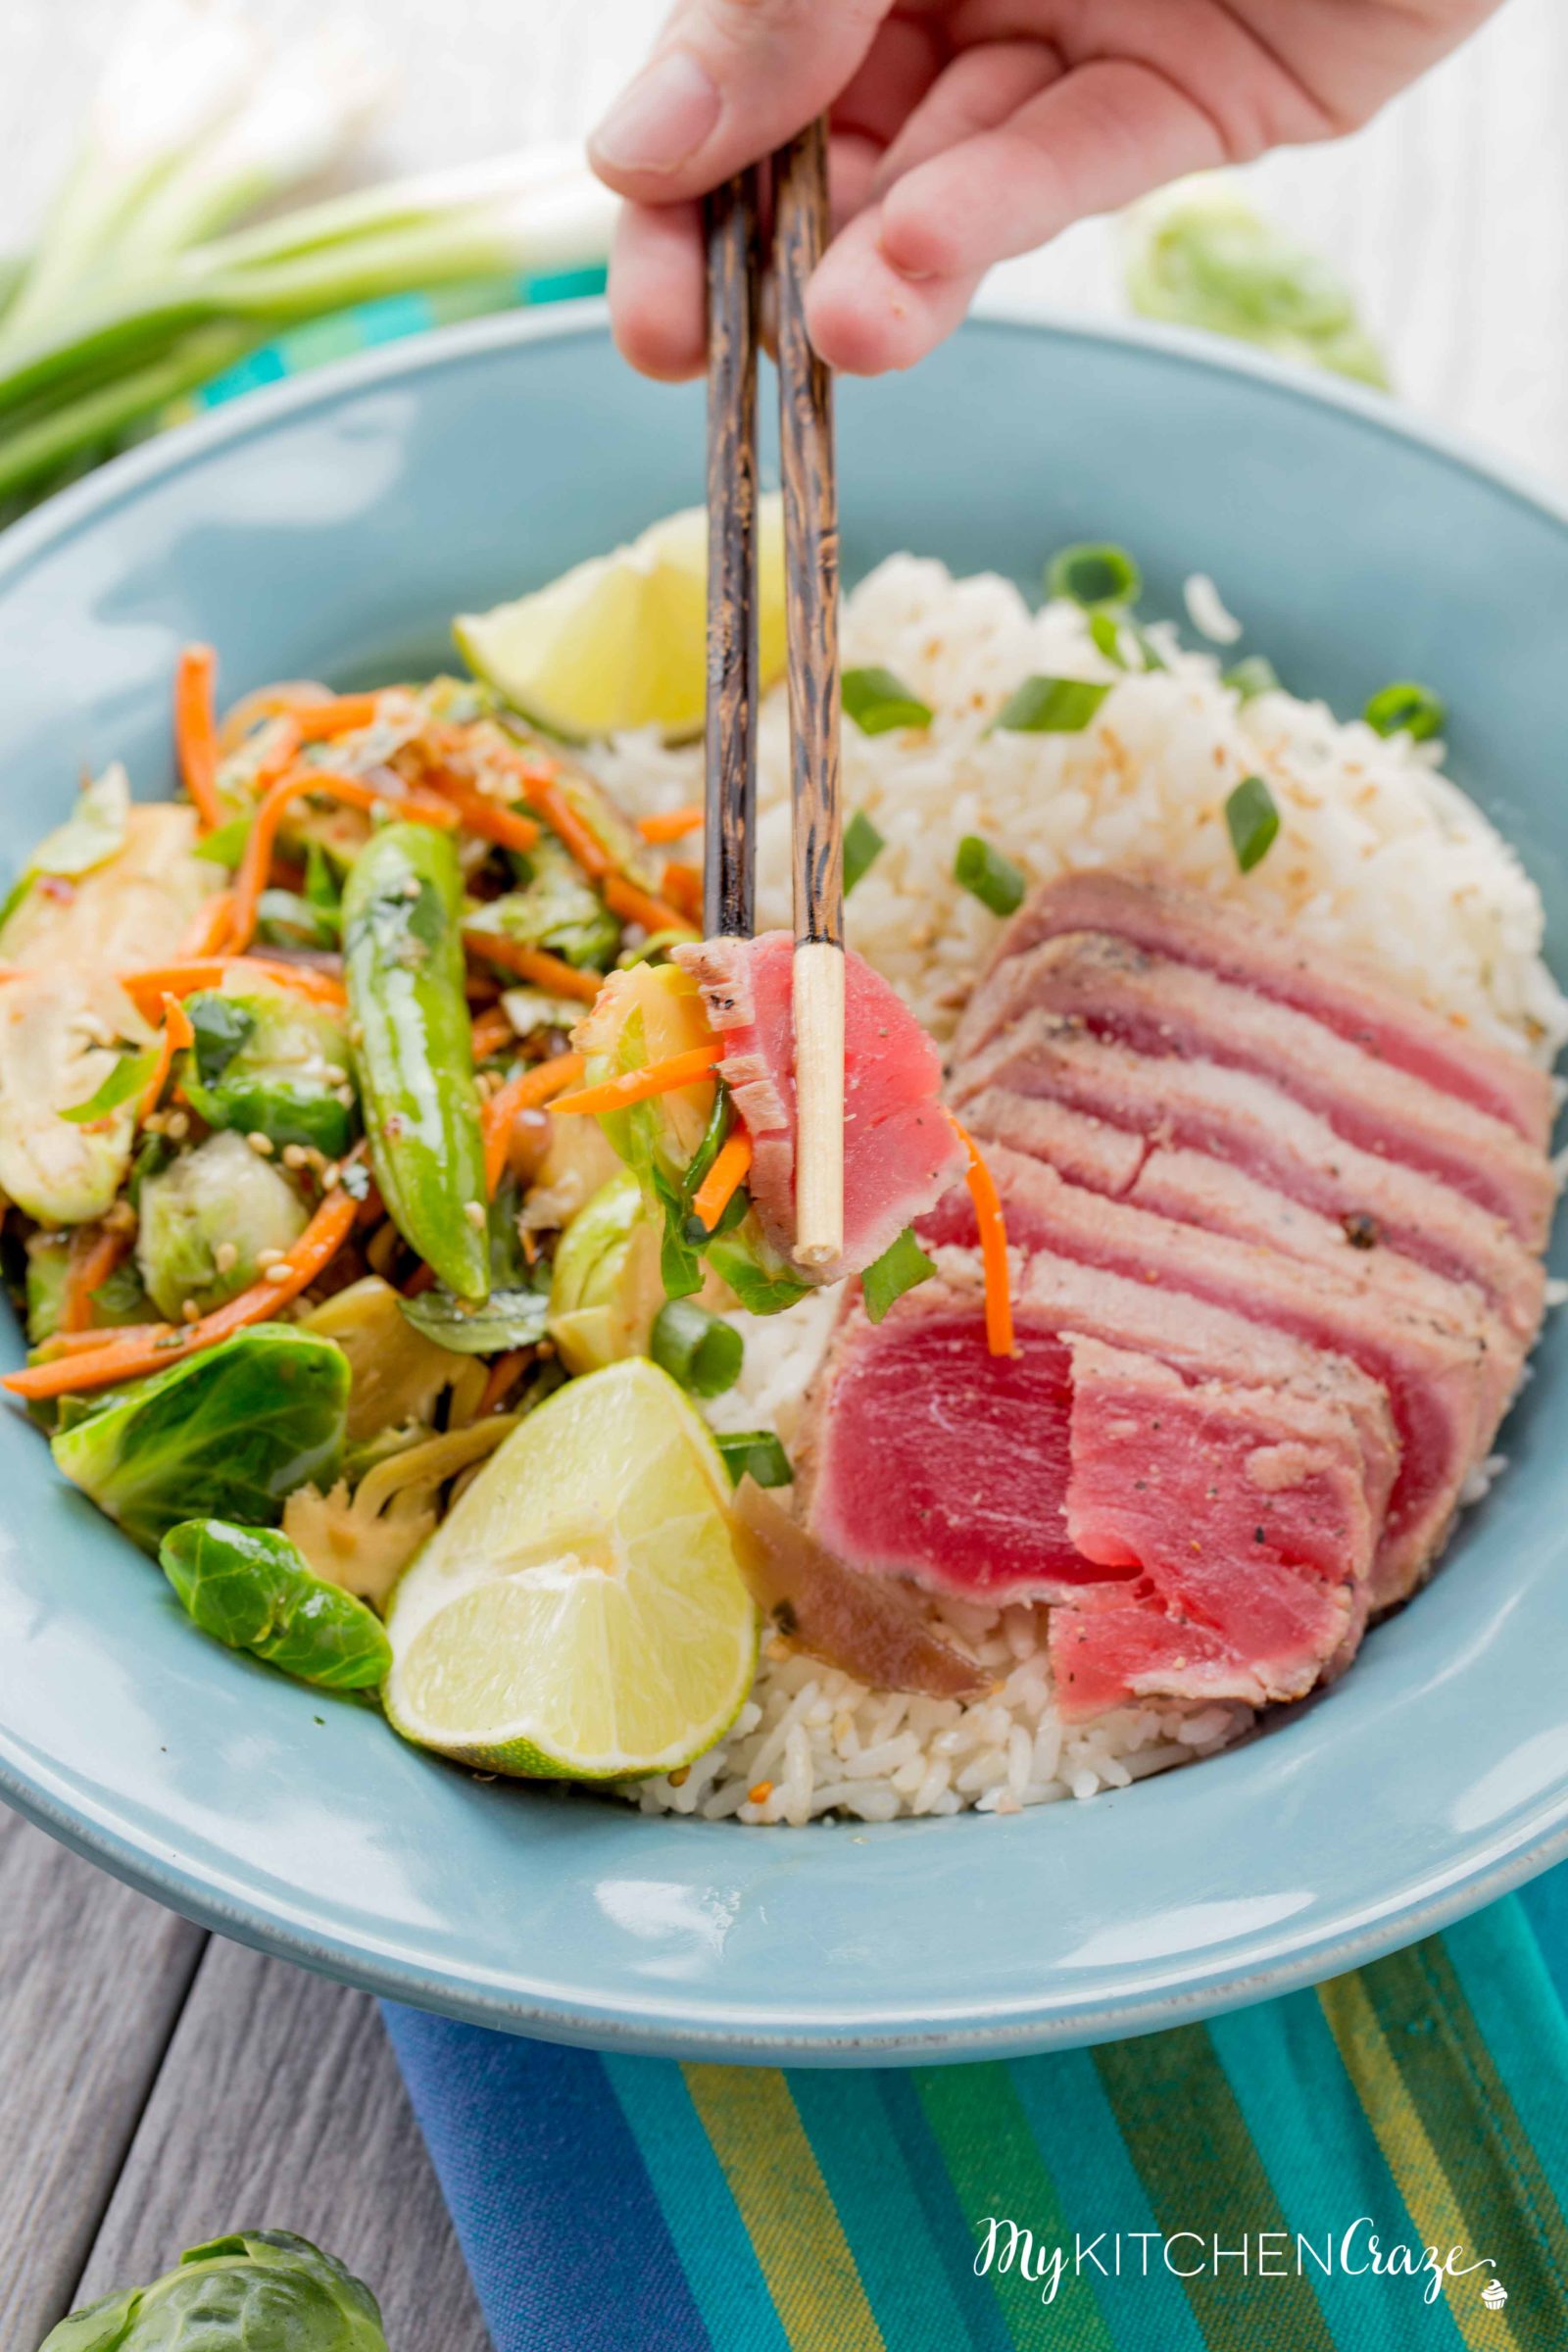 Ahi Tuna Rice Bowls ~ mykitchencraze.com ~ Enjoy these delicious Ahi Tuna Rice Bowls for dinner. These rice bowls are loaded with sautéed vegetables and fresh quality Ahi Tuna! Have a healthy delicious meal on your table within 30 minutes!